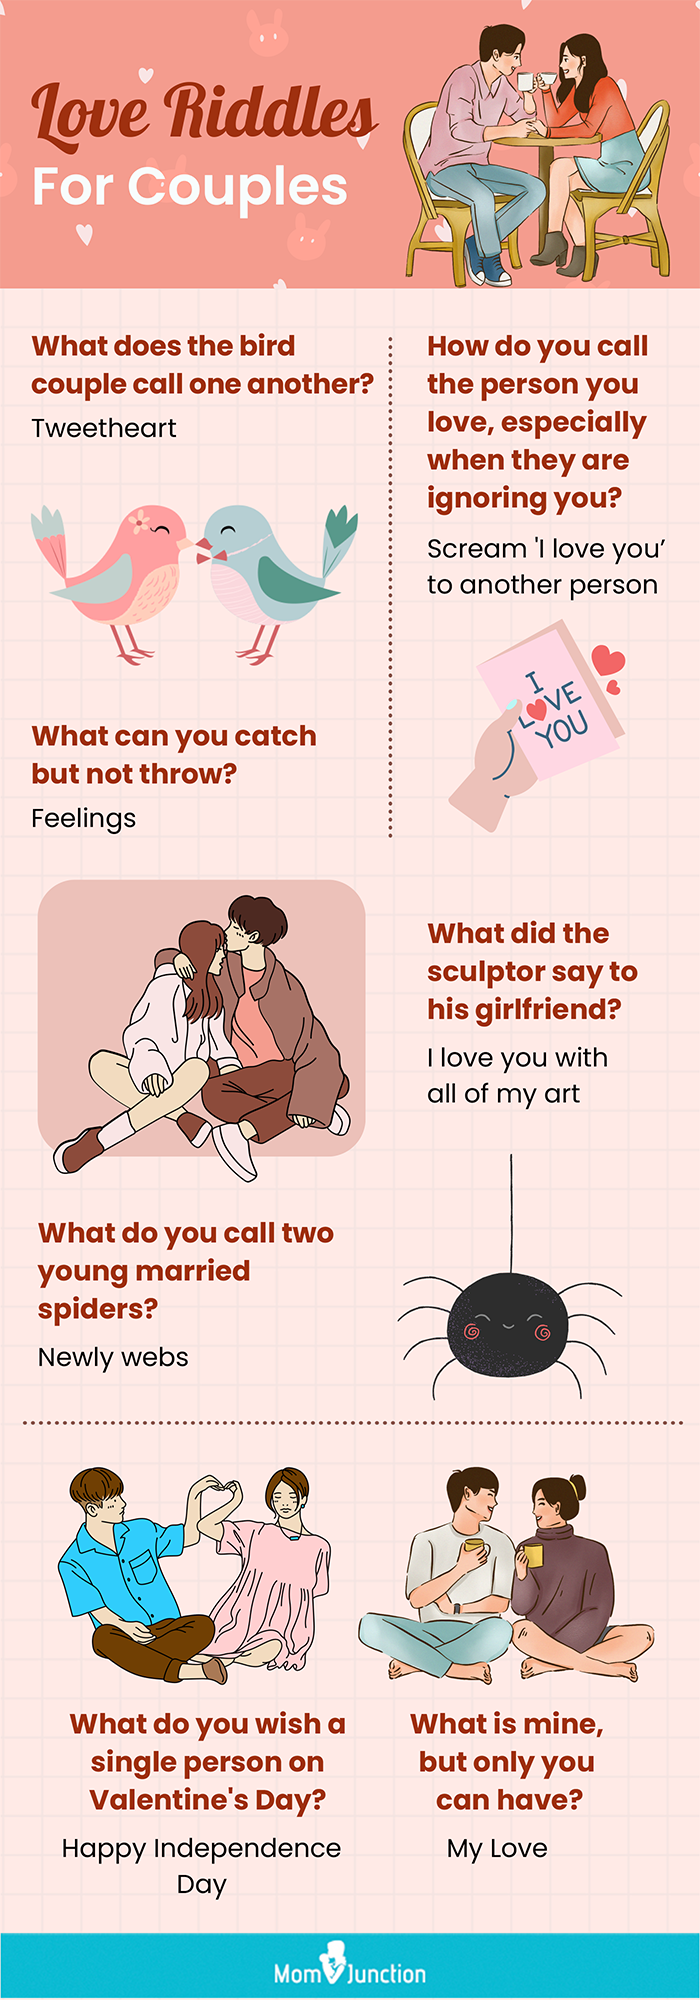 75 Romantic And Funny Love Riddles, With Answers